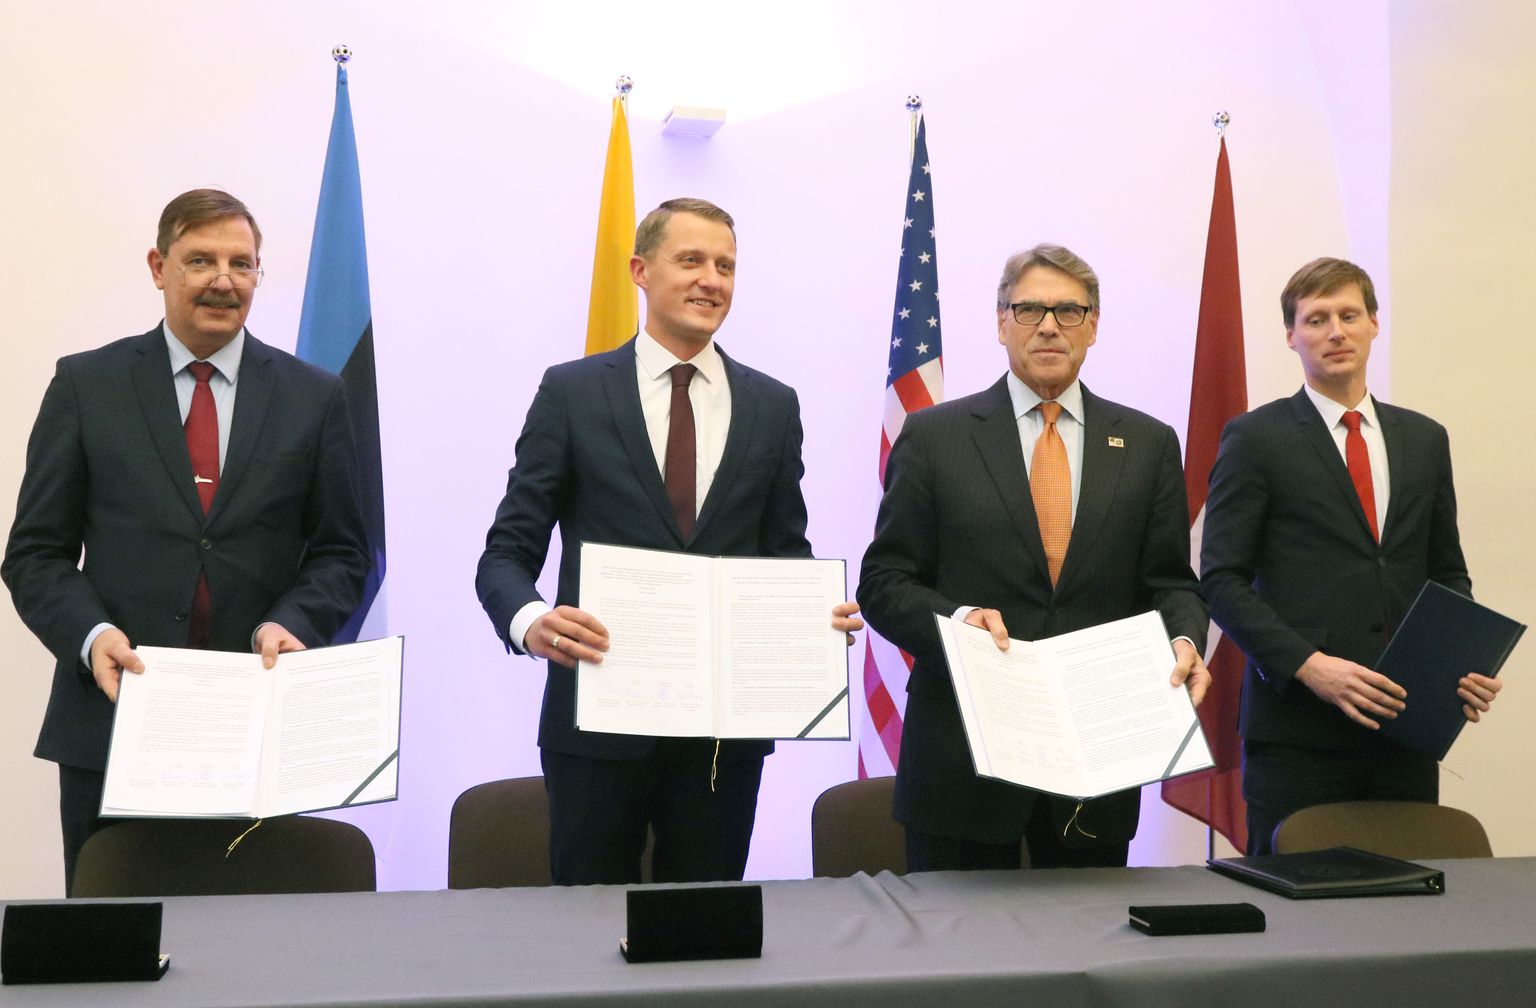 (L-R) Estonian Minister of Economy and Infrastructure Taavi Aas, Lithuanian Minister of Energy Zygimantas Vaiciunas, US Secretary of Energy Rick Perry and Latvian Minister of Economy Ralfs Nemiro shows documents after signing an agreement on strengthening energy cooperation between the US and the Baltic States during a meeting in Vilnius, Lithuania, on October 6, 2019. - The United States and Baltic states on October 6, 2019 agreed to beef up cooperation to protect the Baltic energy grid from cyber attacks as they disconnect from the Russian electricity grid. (Photo by Petras Malukas / AFP)